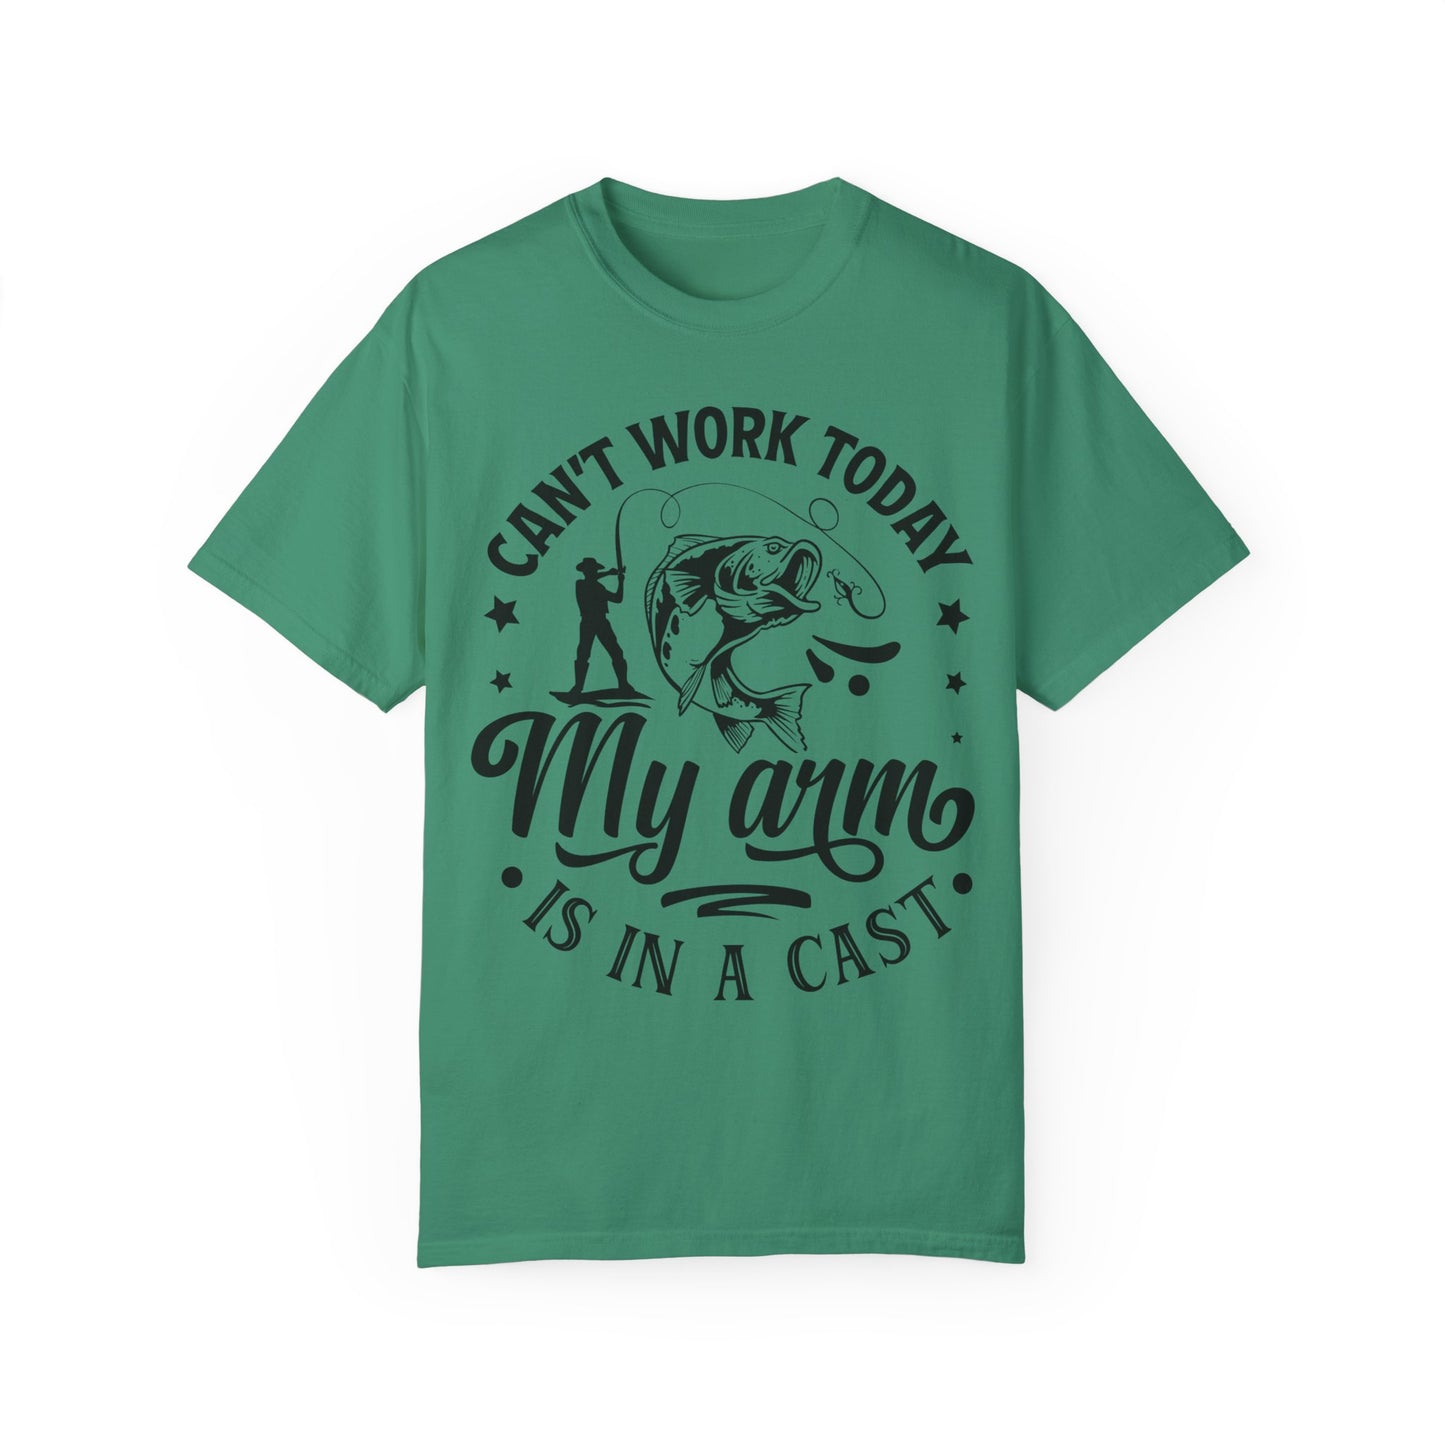 Can't go to work today: Unisex Garment-Dyed T-shirt